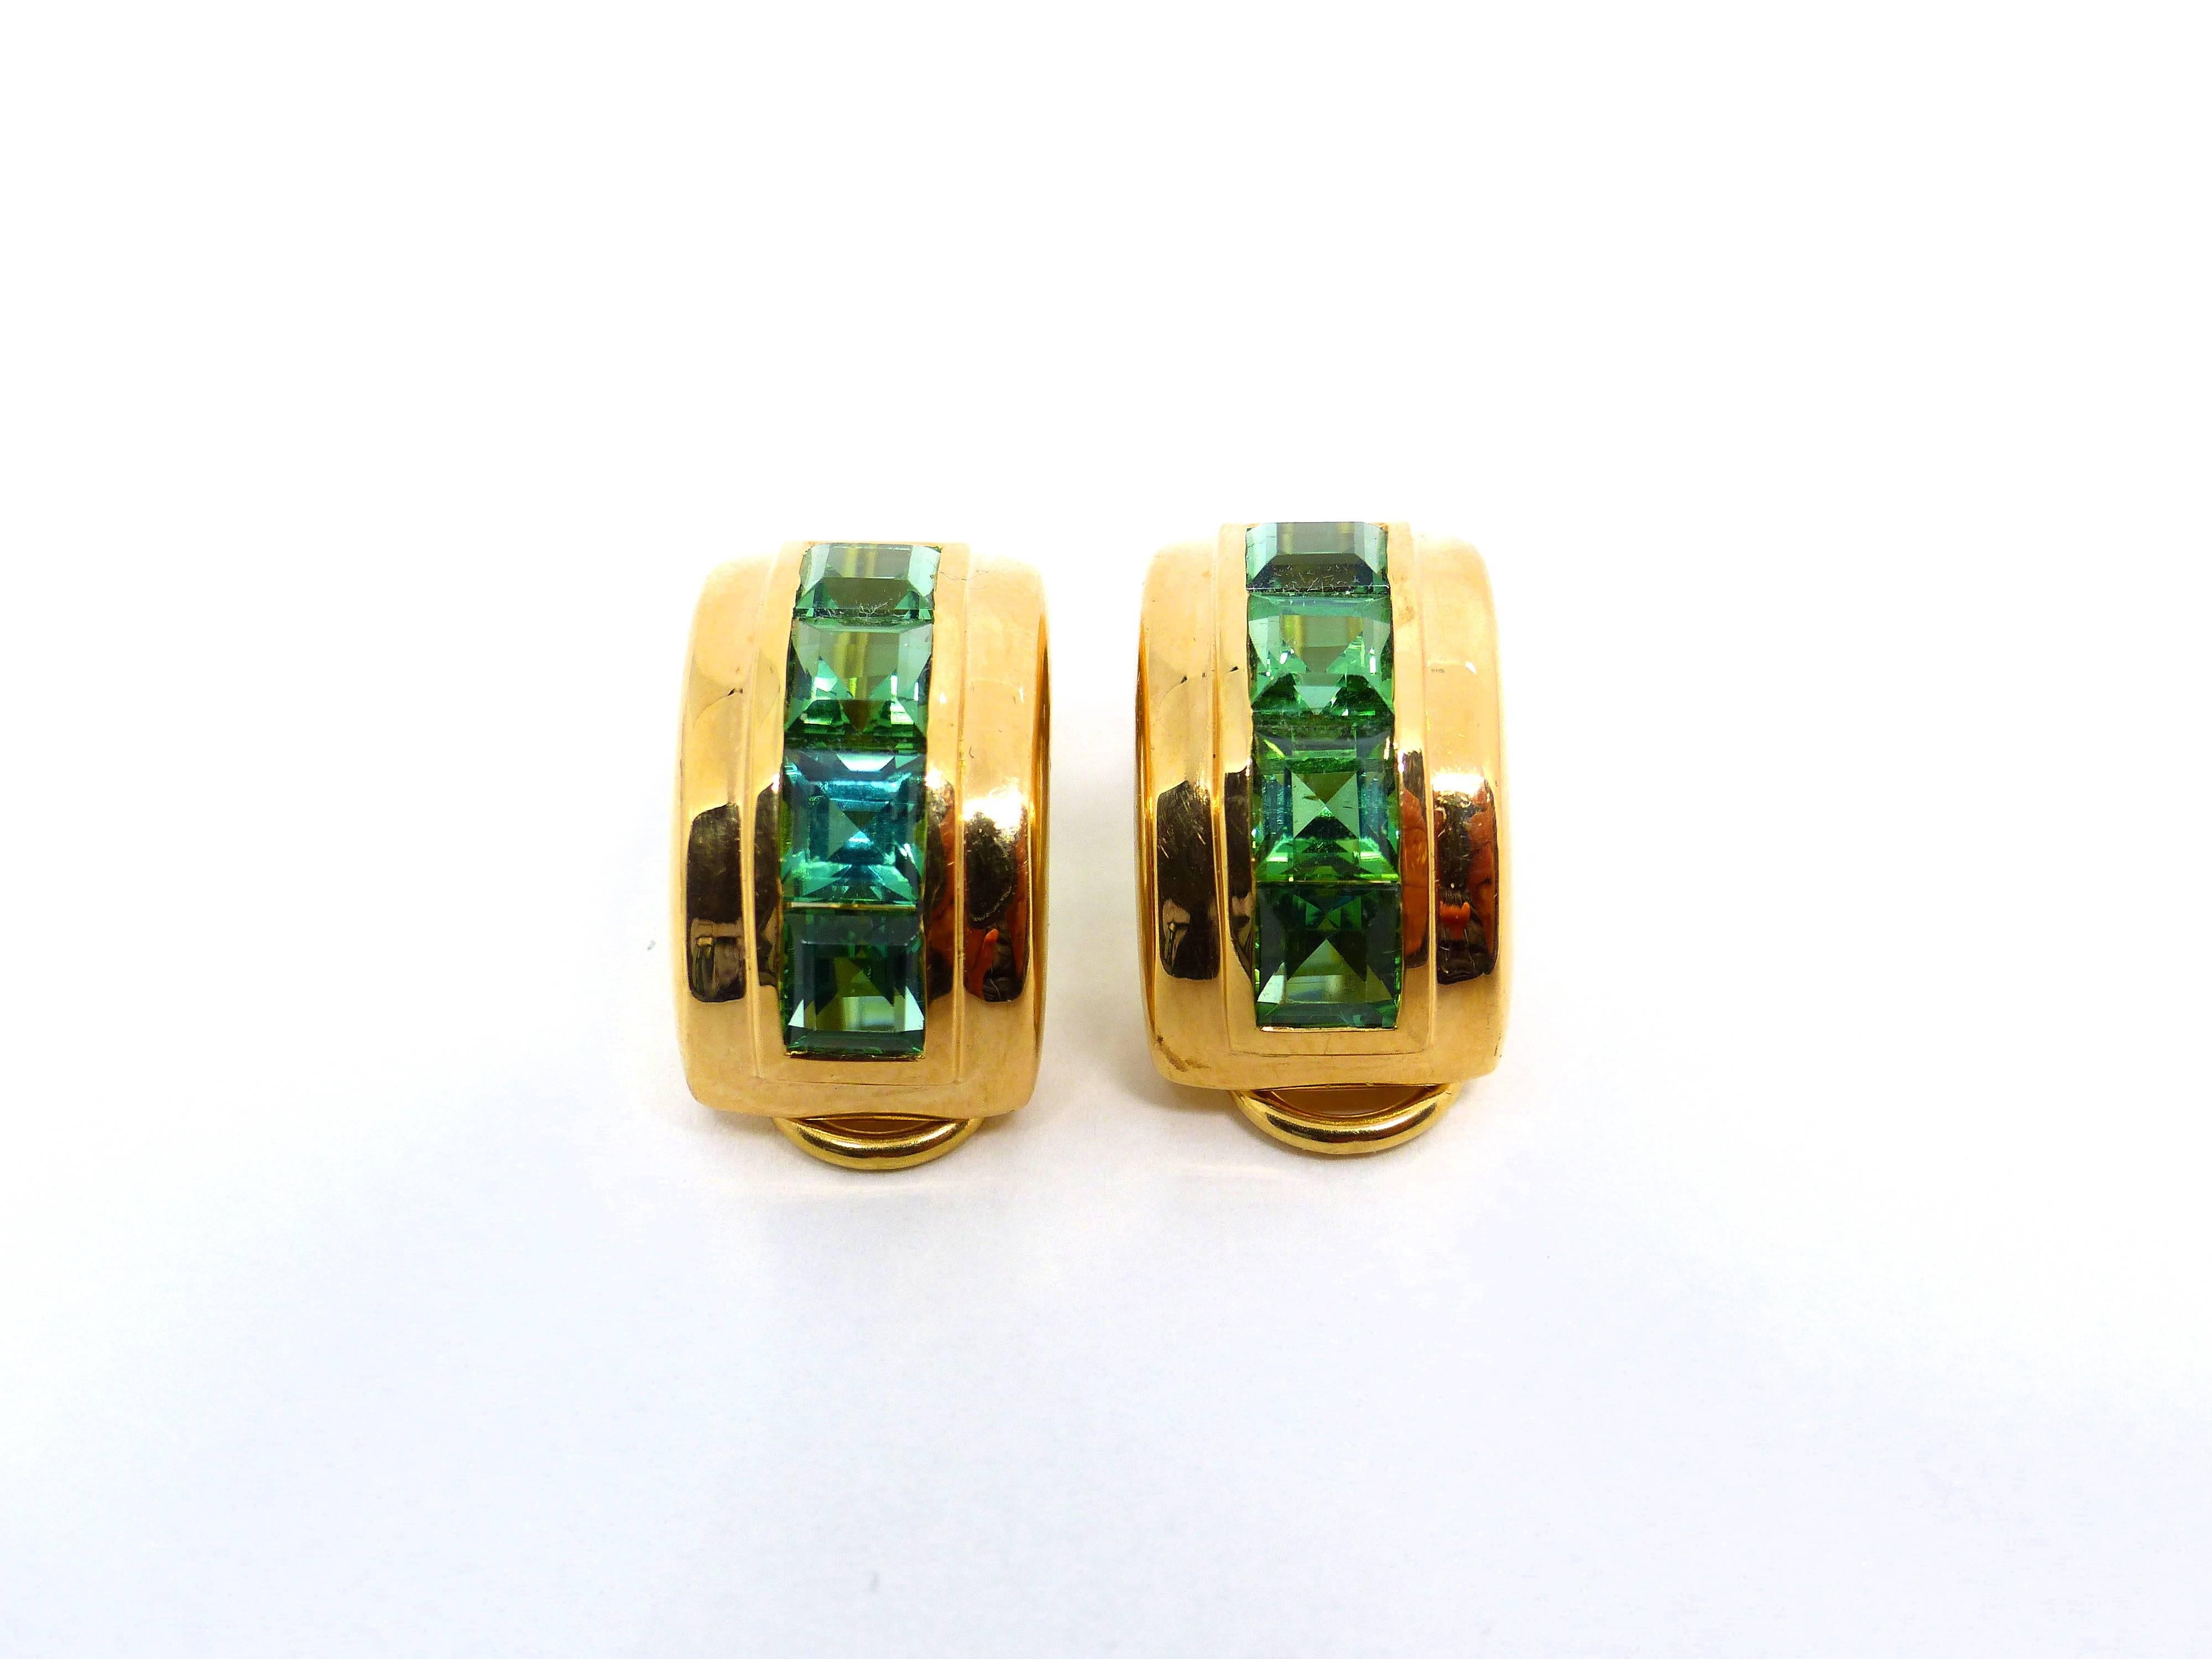 Thomas Leyser is renowned for his contemporary jewellery designs utilizing fine coloured gemstones and diamonds. 

This pair of earrings in 18k rose gold is set with 8 fine green Tourmalines facetted square cut 4.5mm (4.82ct). 

There are clips at